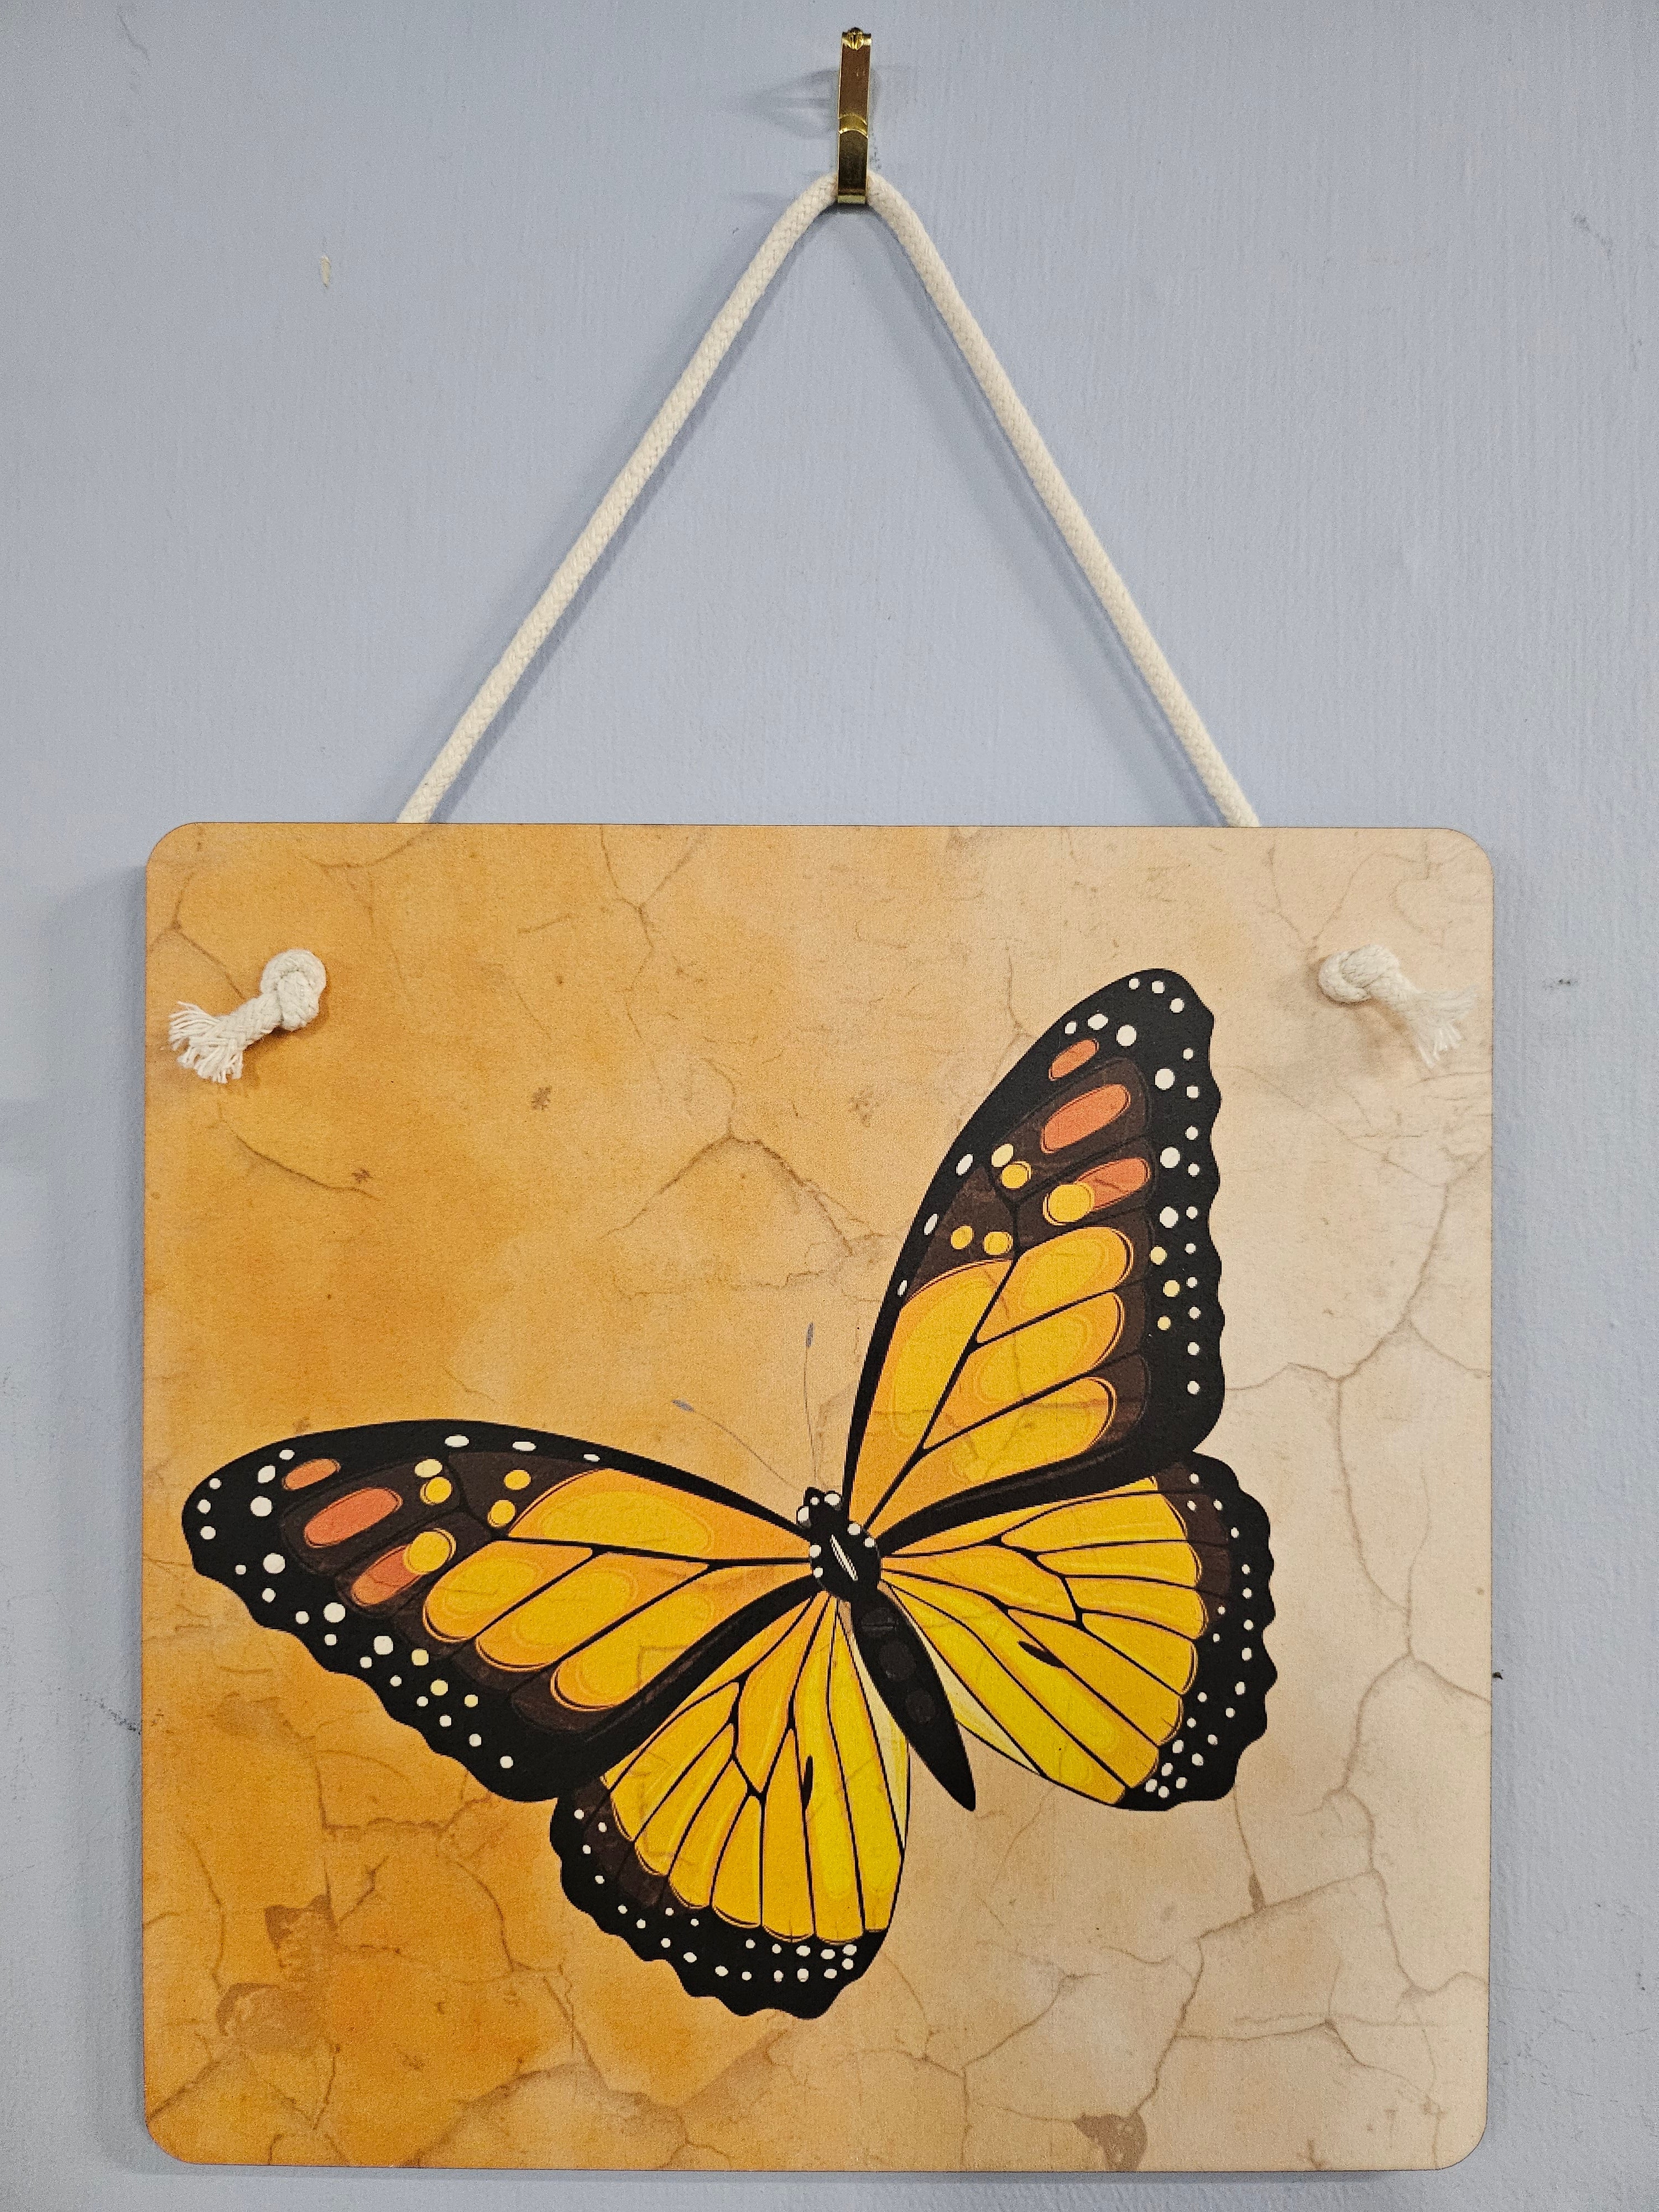 Wood Plaque 9x9" - Monarch Butterfly - 10-070